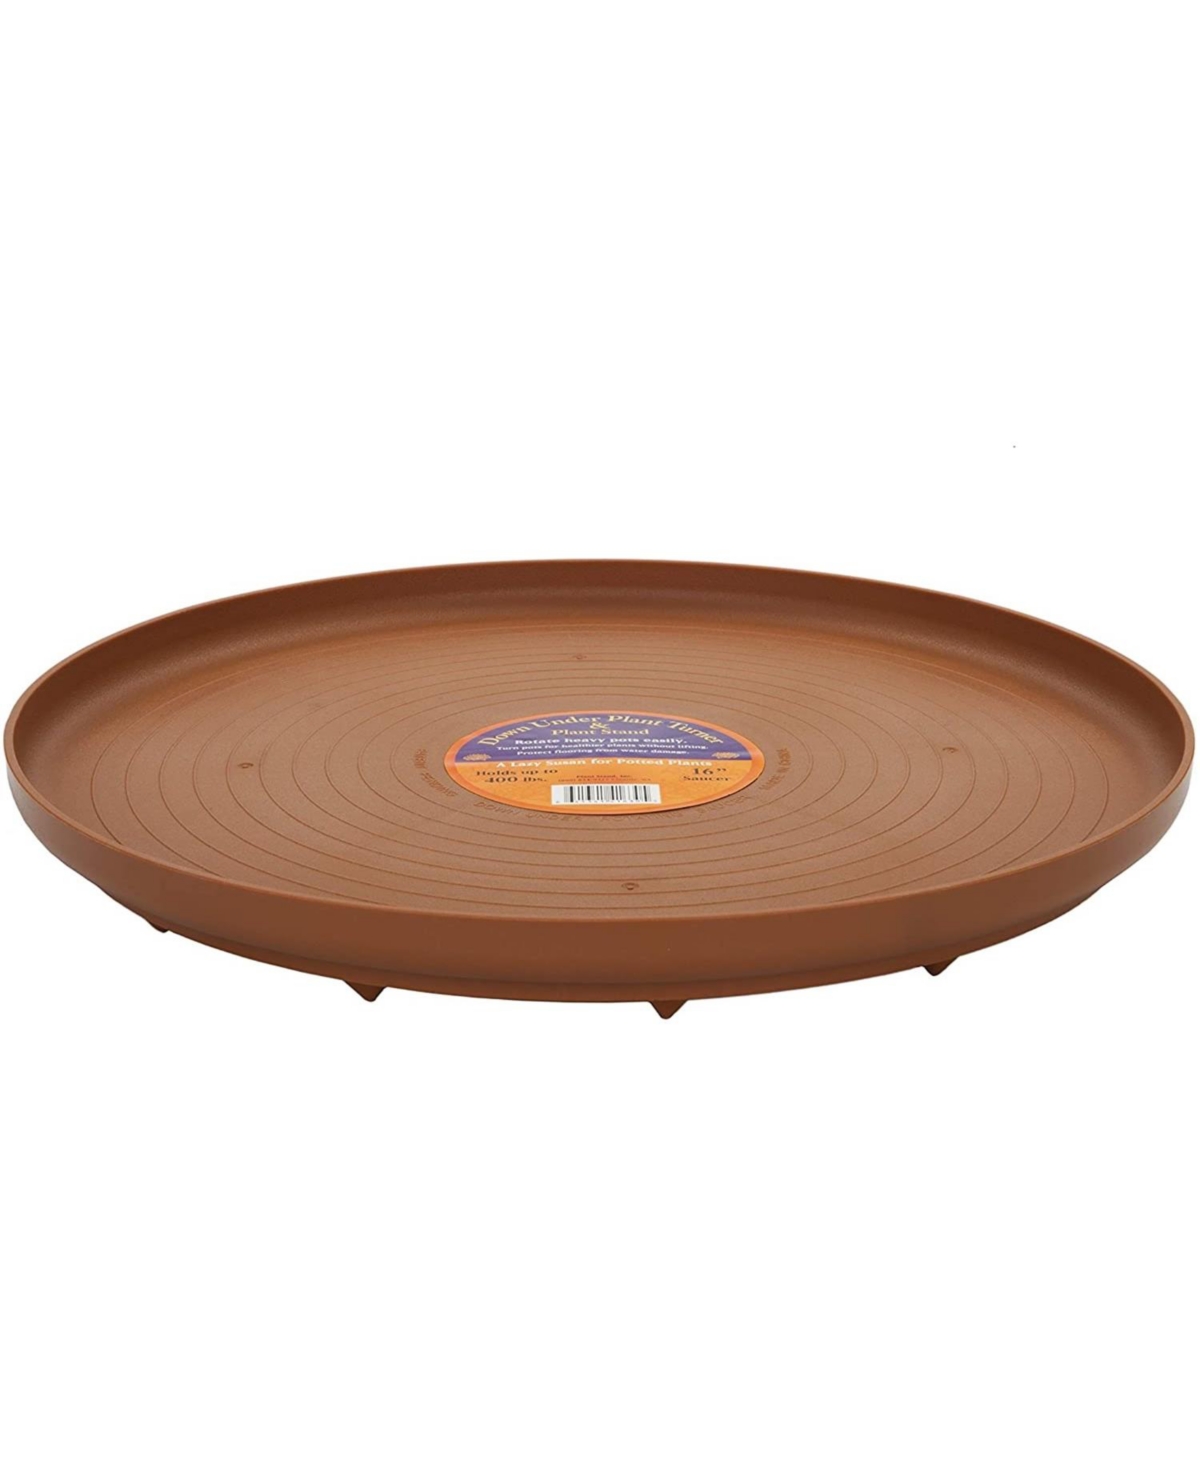 S41630 Down Under Plant Turner, Terra Cotta 16in Circumference - Brown